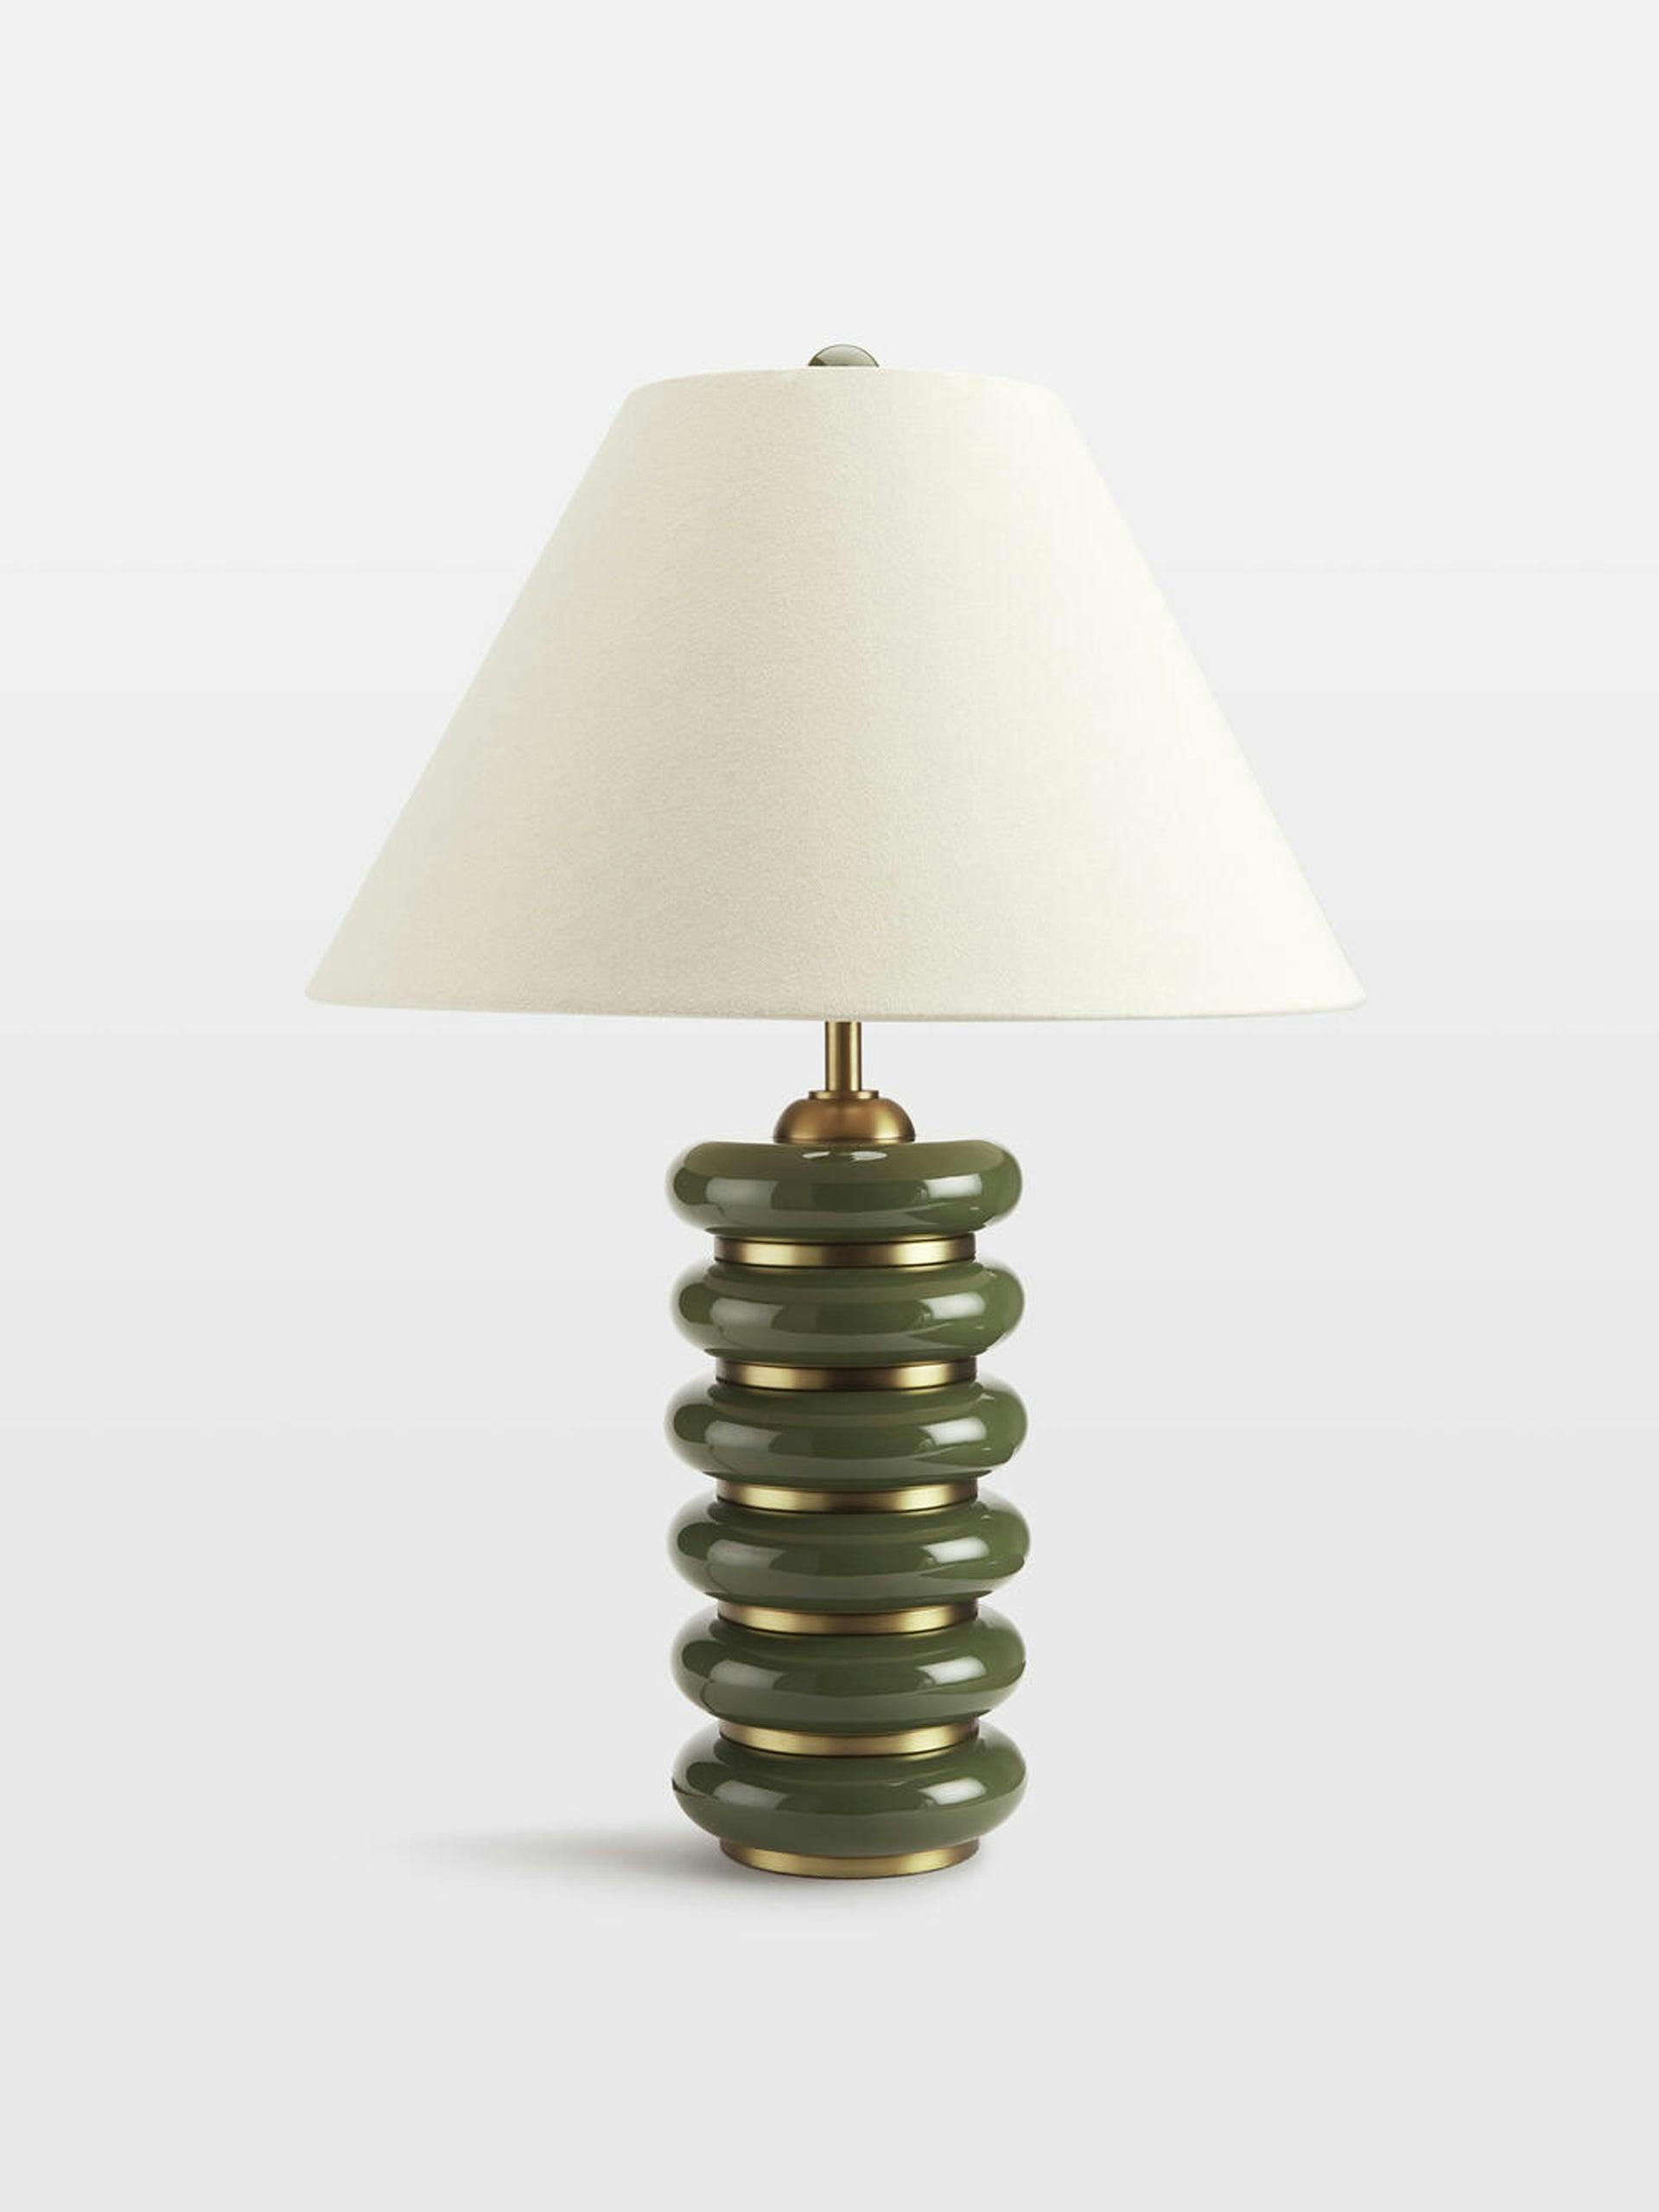 Table lamp in Olive